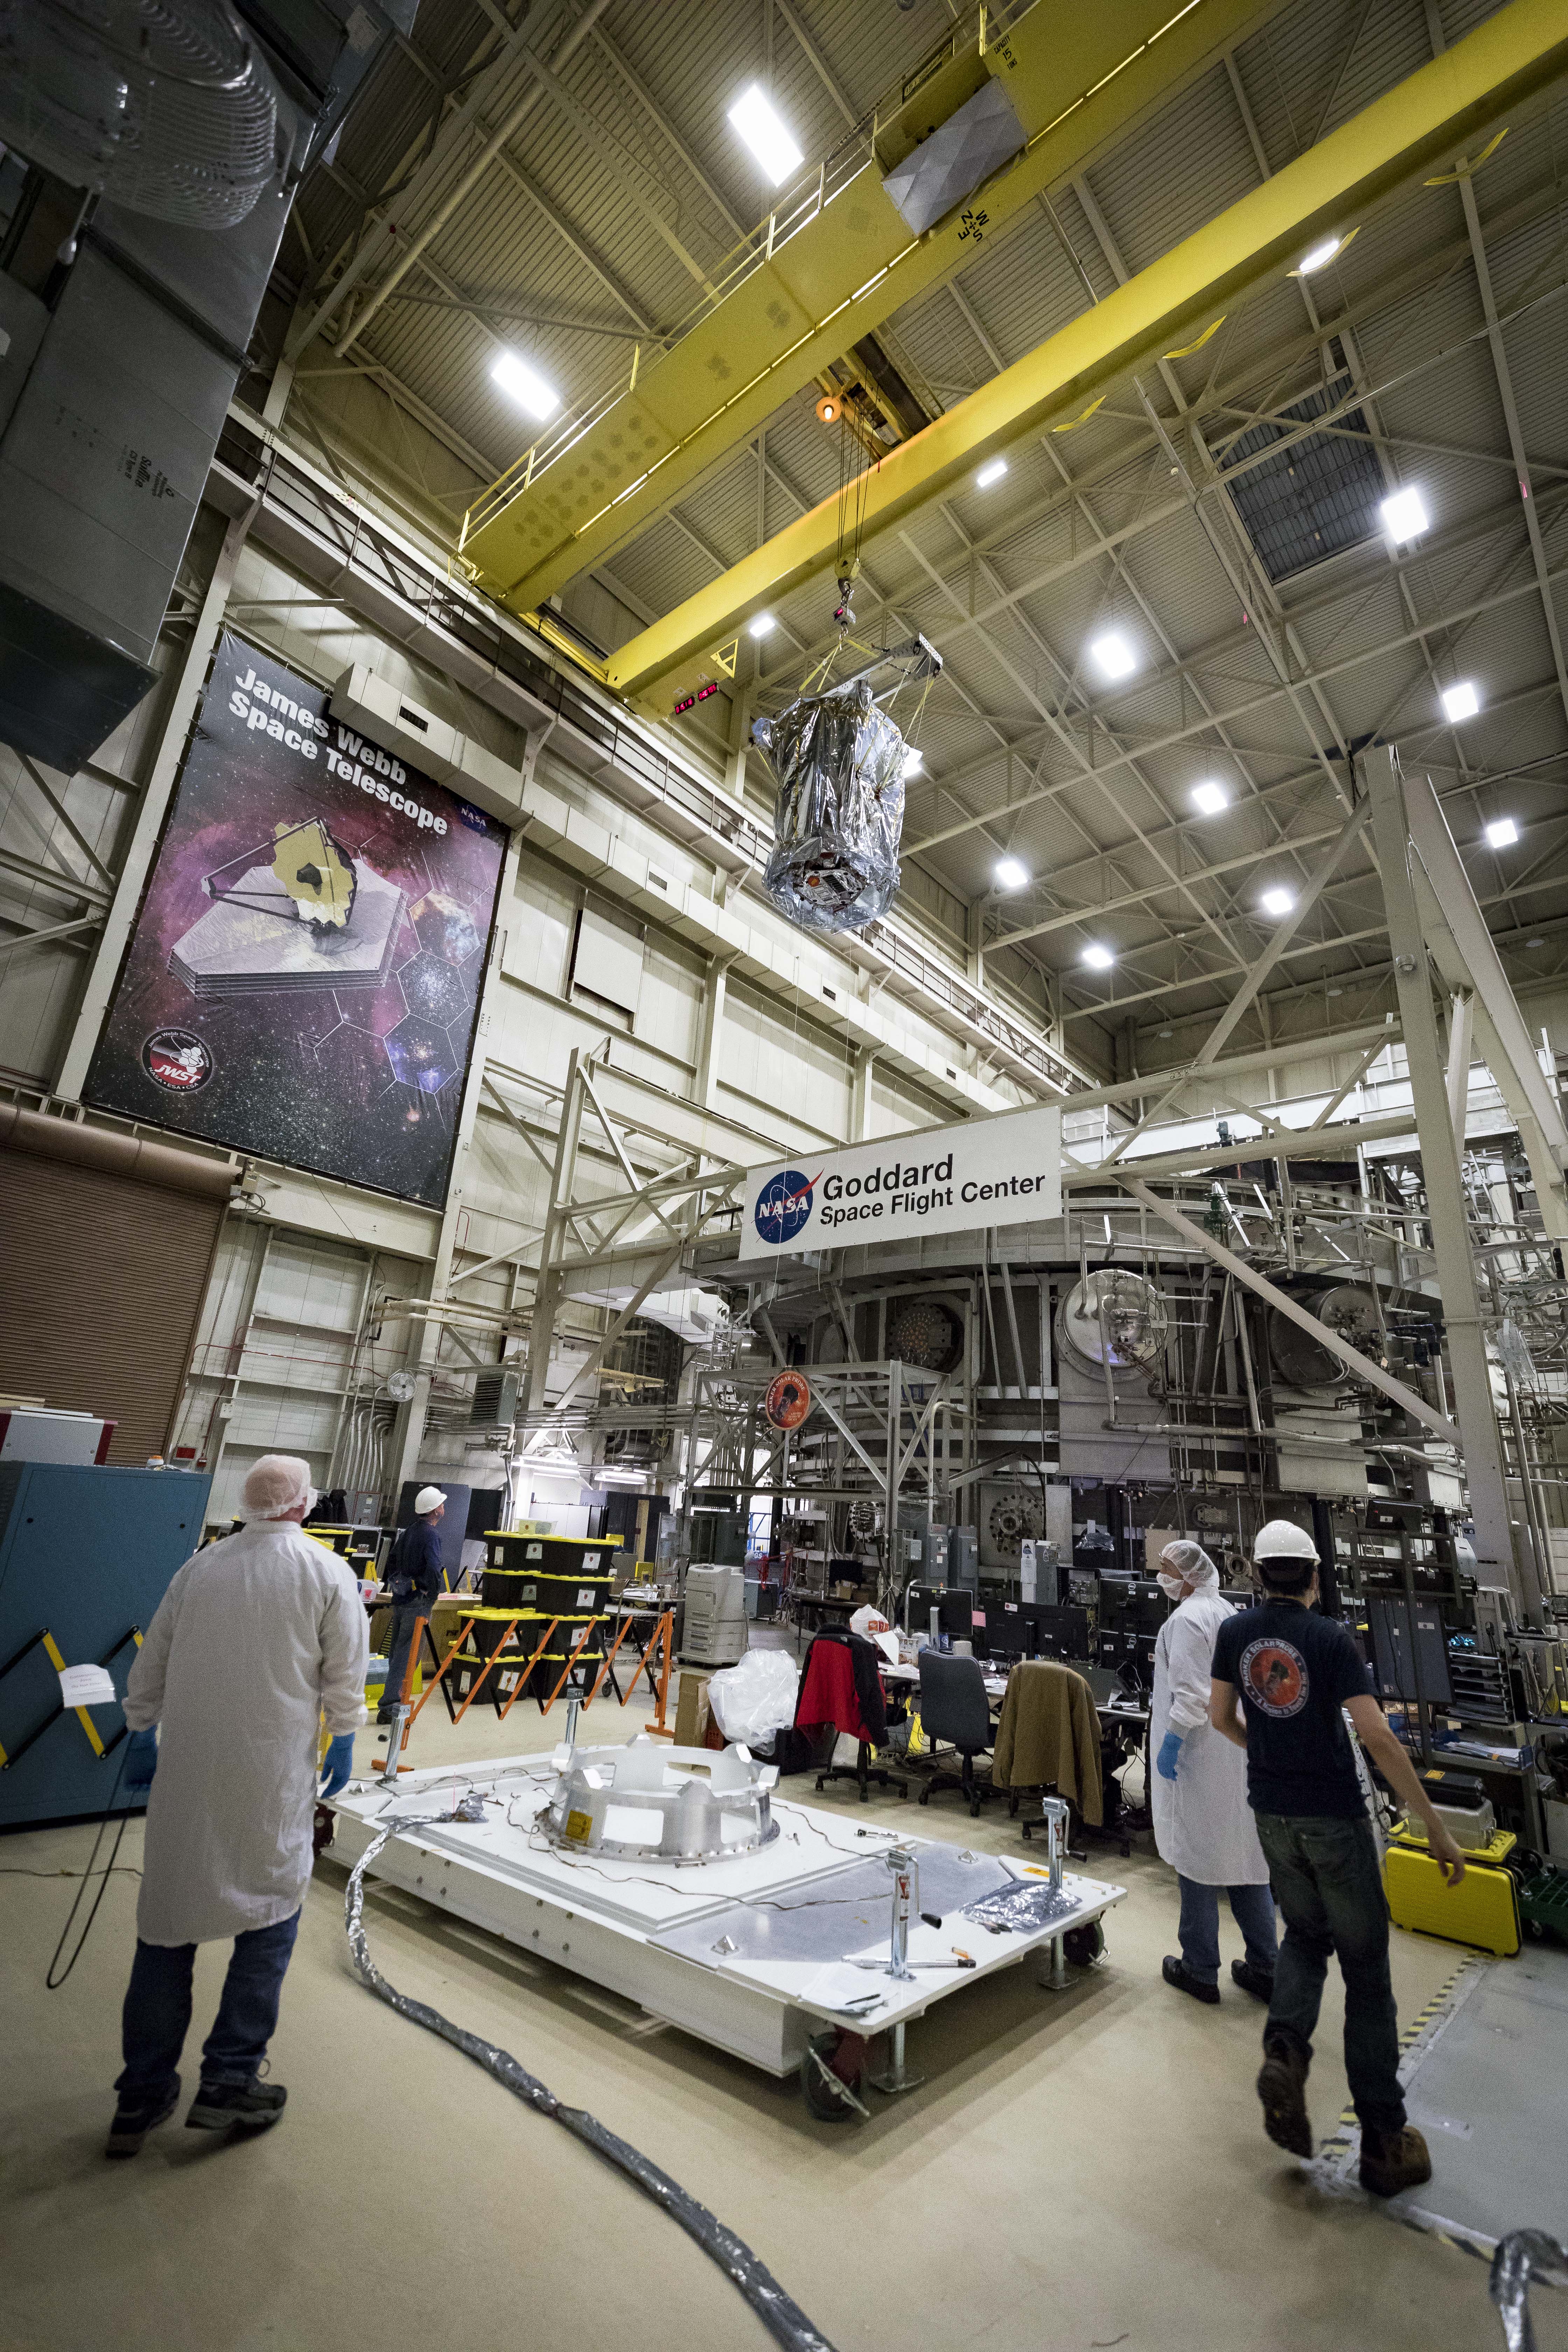 Members of the Parker Solar Probe team from the Johns Hopkins Applied Physics Lab in Laurel, Maryland, monitor the progress of the spacecraft as it is lifted from the Space Environment Simulator at NASA’s Goddard Space Flight Center in Greenbelt, Maryland, and lowered to the custom platform visible in the foreground. The spacecraft has spent eight weeks undergoing space environment testing in the thermal vacuum chamber before being lifted out on March 24, 2018. 